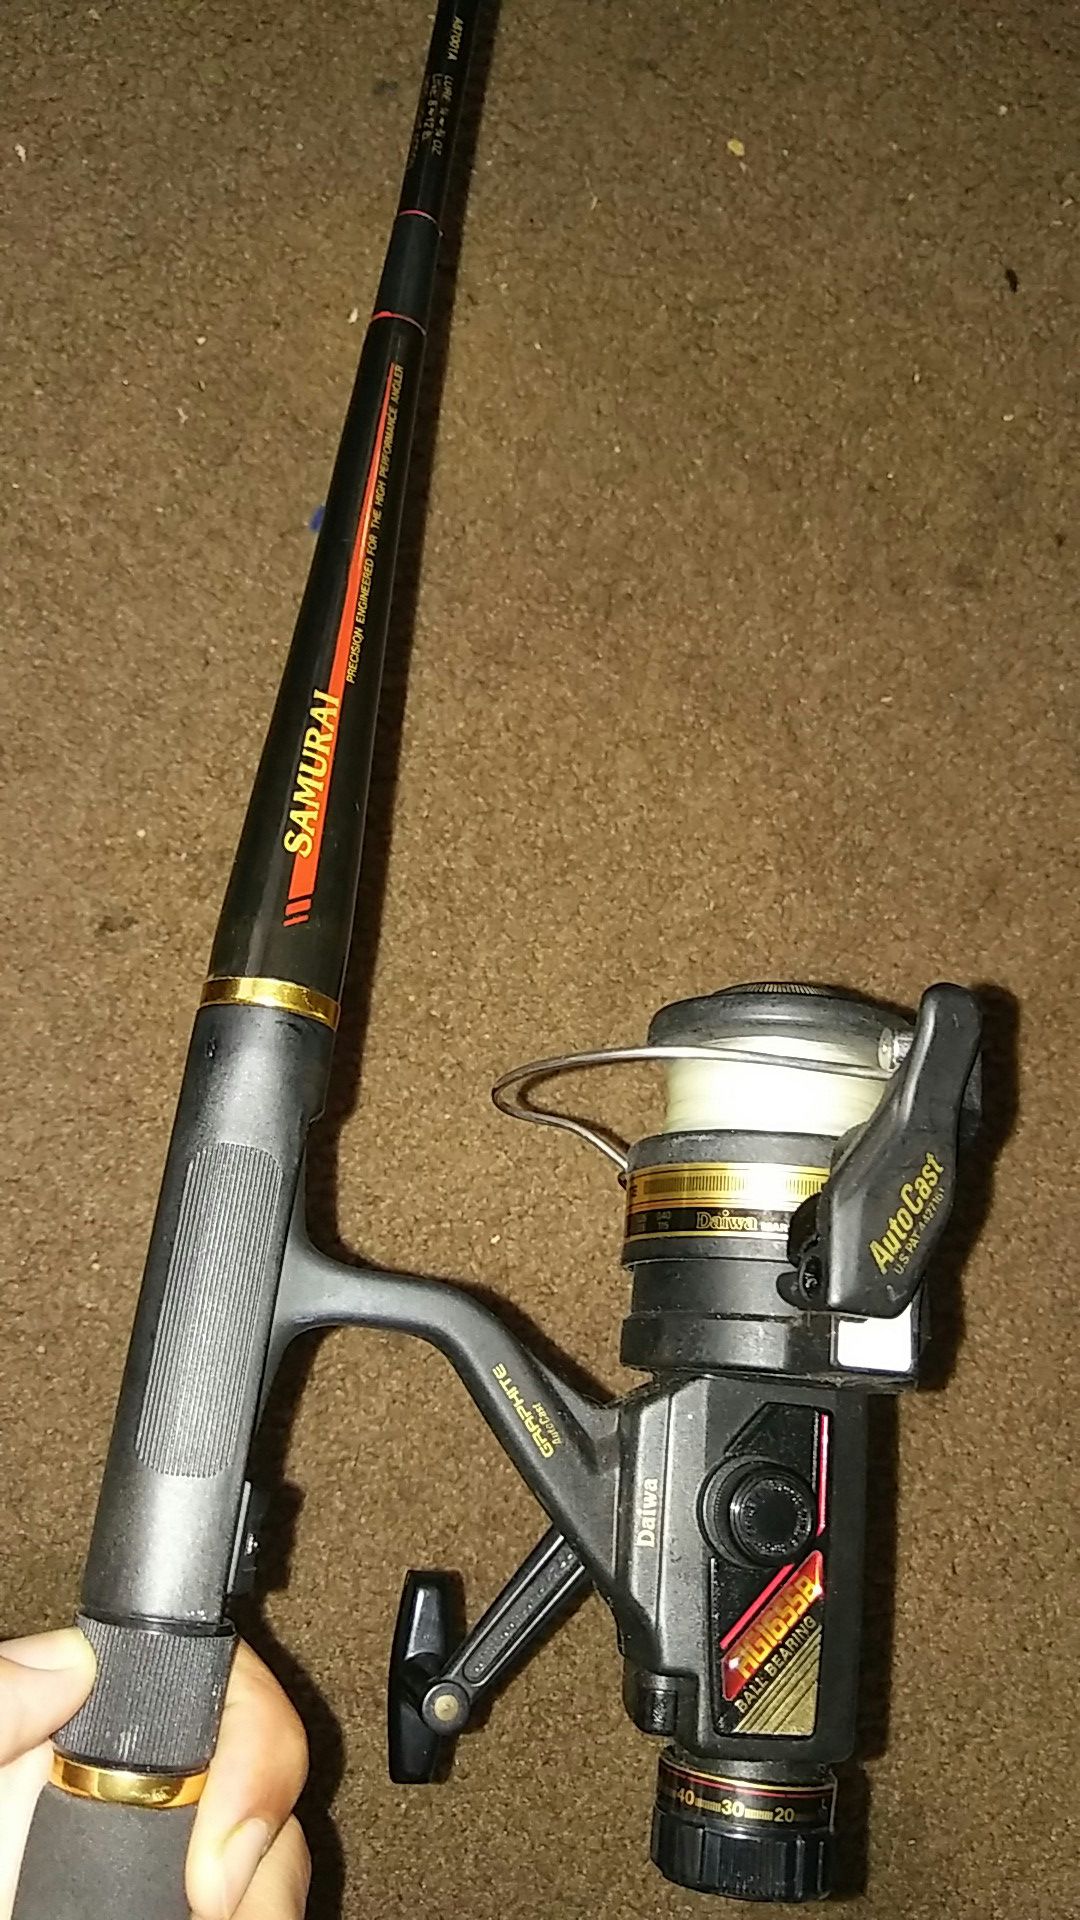 Daiwa samurai spinning reel in mint condition. Rod is sold. for